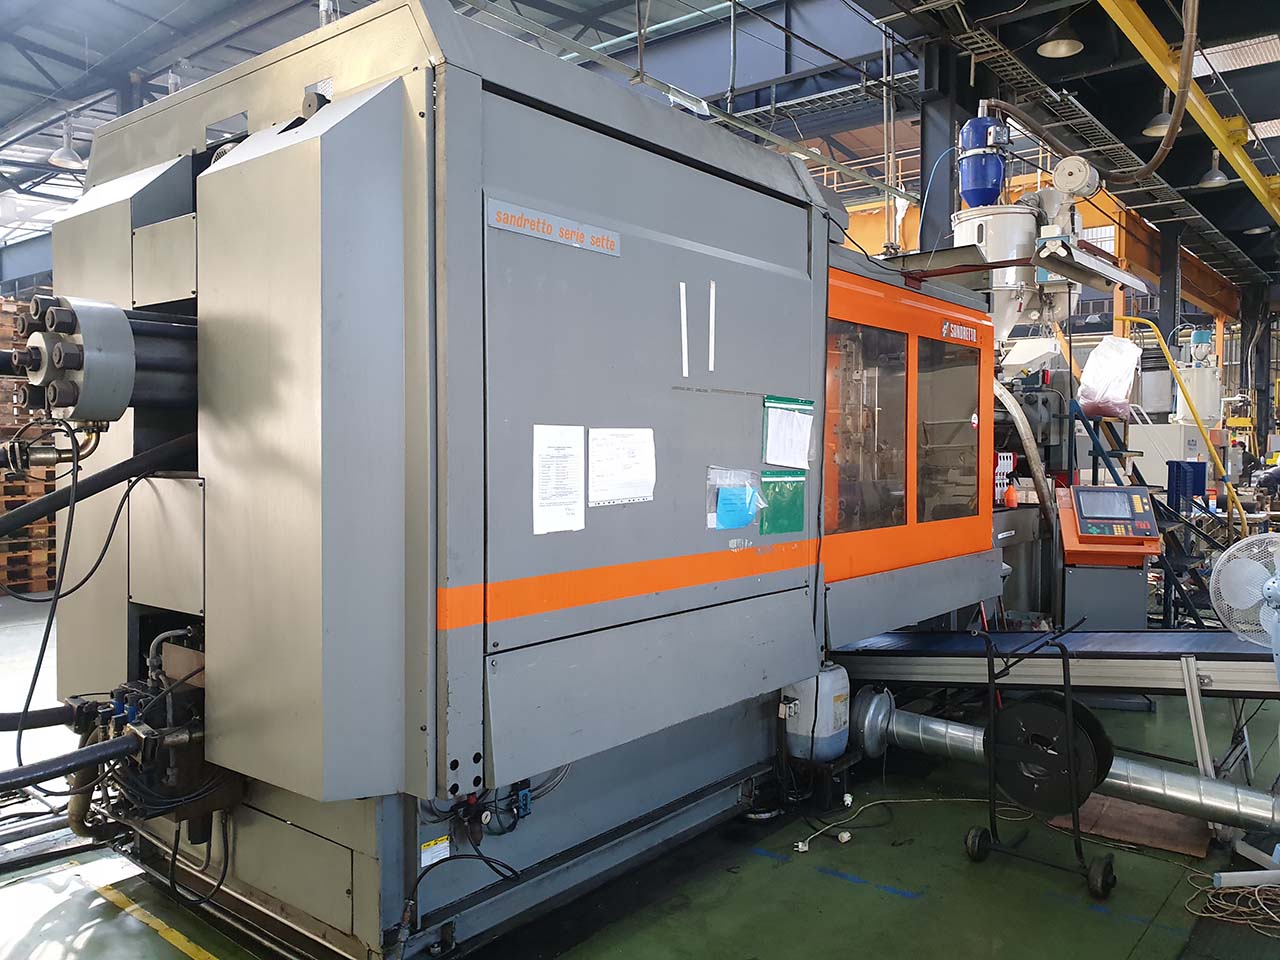 Sandretto 650 injection moulding machine IA2537, used